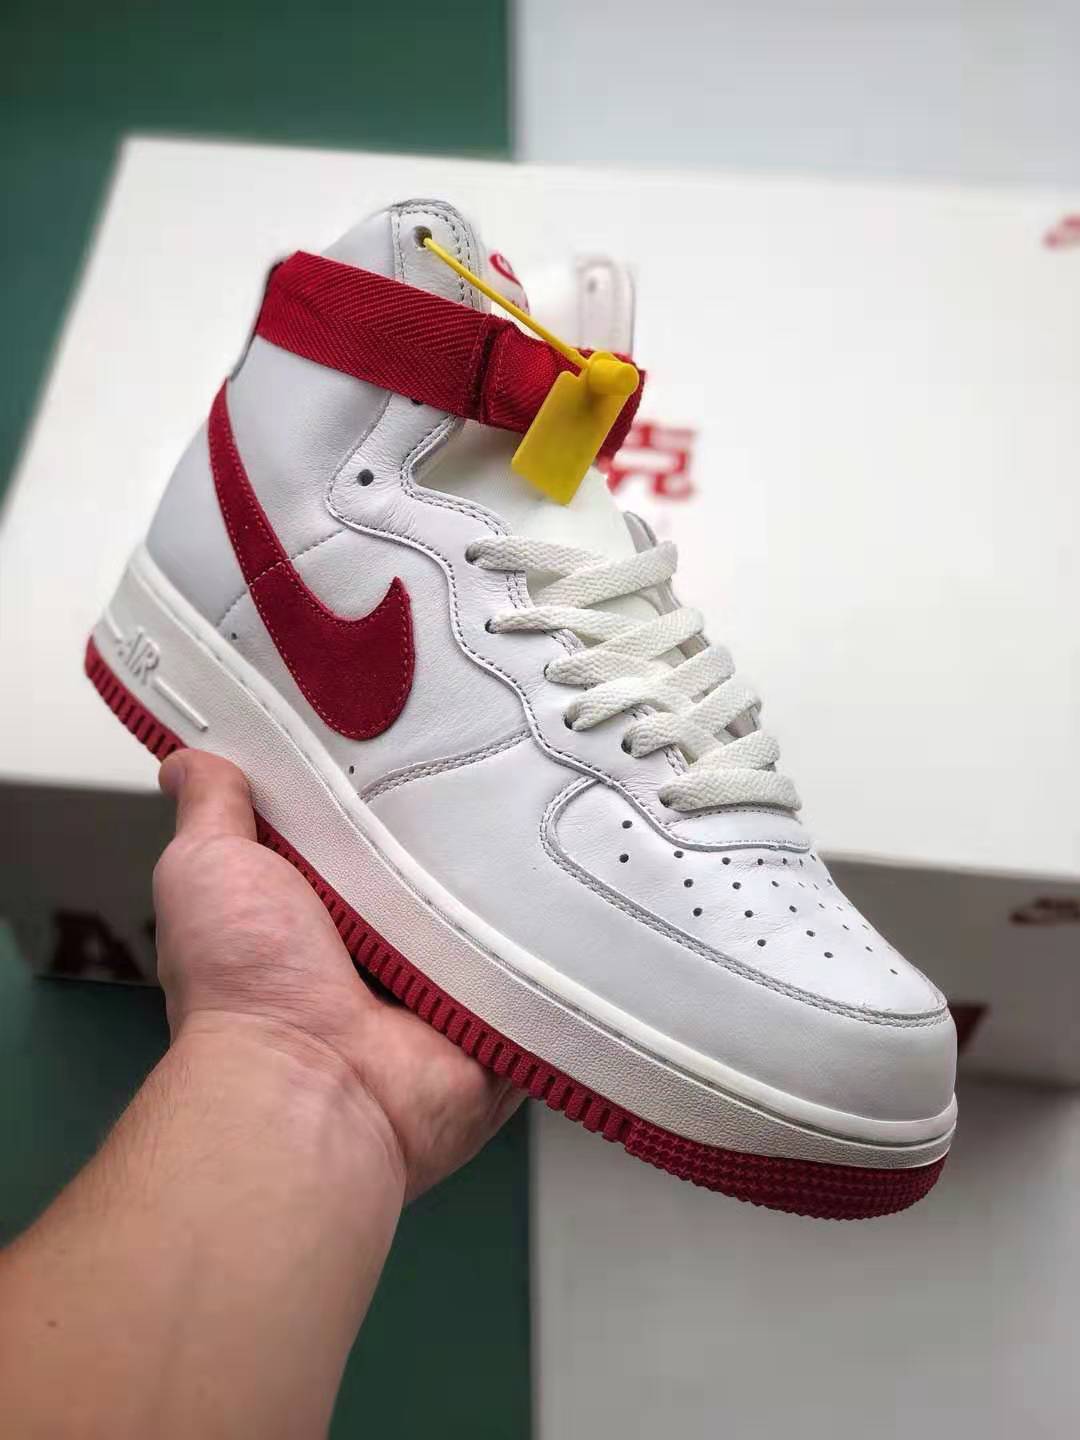 Nike Air Force 1 High 'NAI-KE' 743546-100: Iconic Design for a Timeless Style